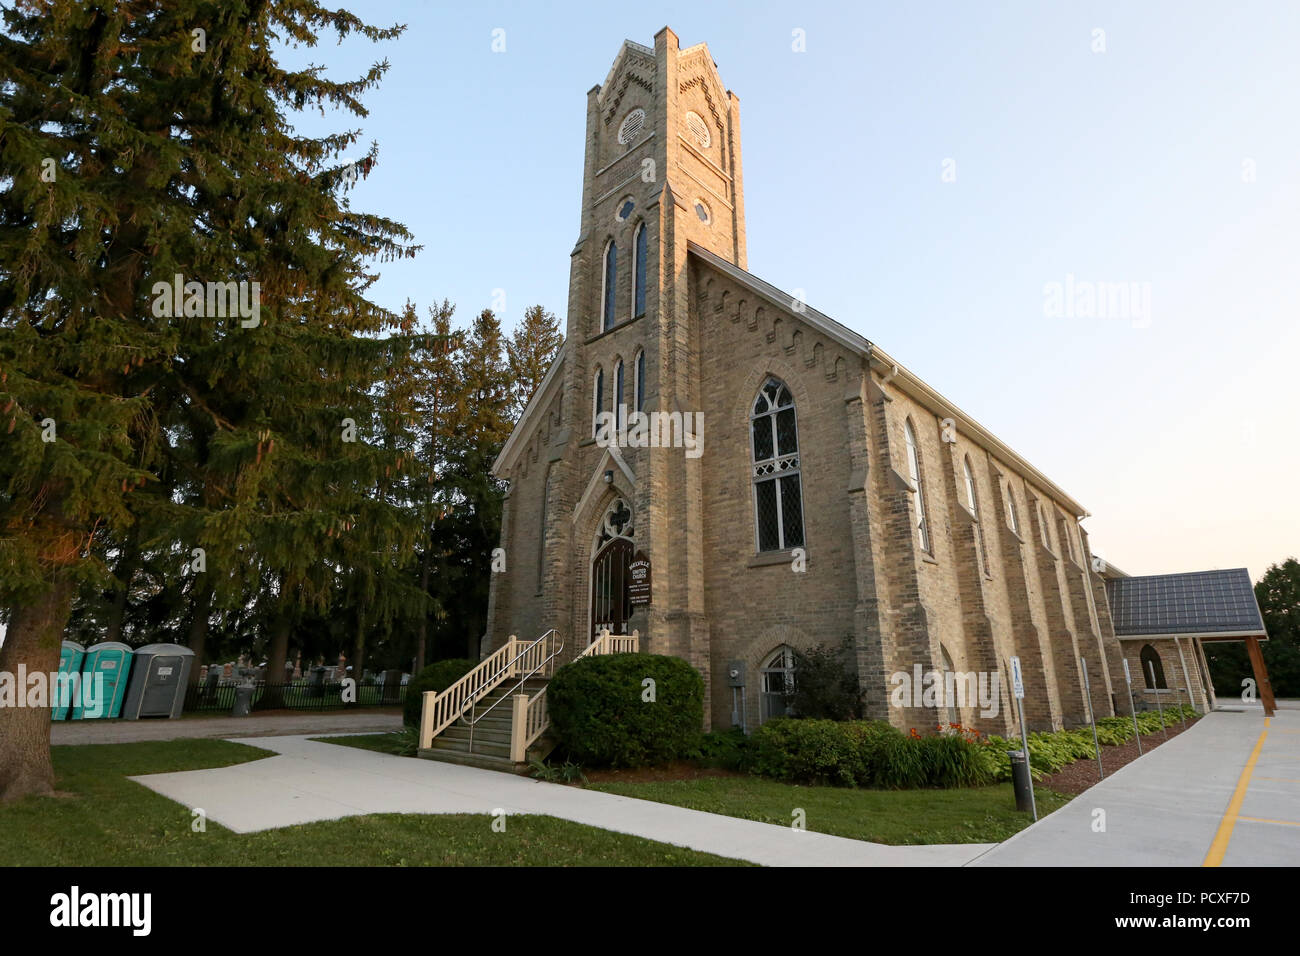 Ontario, Canada. 4 August2018. No one could tell you when the last time Sunday service was cancelled at Melville United Church in Lobo. Due to the Cycling event at 2018 Ontario summer games the mass was cancelled on Sunday Aug 5 2018,  The finish line is right in front of the church on Nairn Rd. The church is also being used as a location to feed the athletes and volunteers of the games.  “The congregation voted unanimously to close the church for the day. This was decided to support the Ontario Summer Games, our young athletes, and because we saw it as an opportunity for community outreach, O Stock Photo